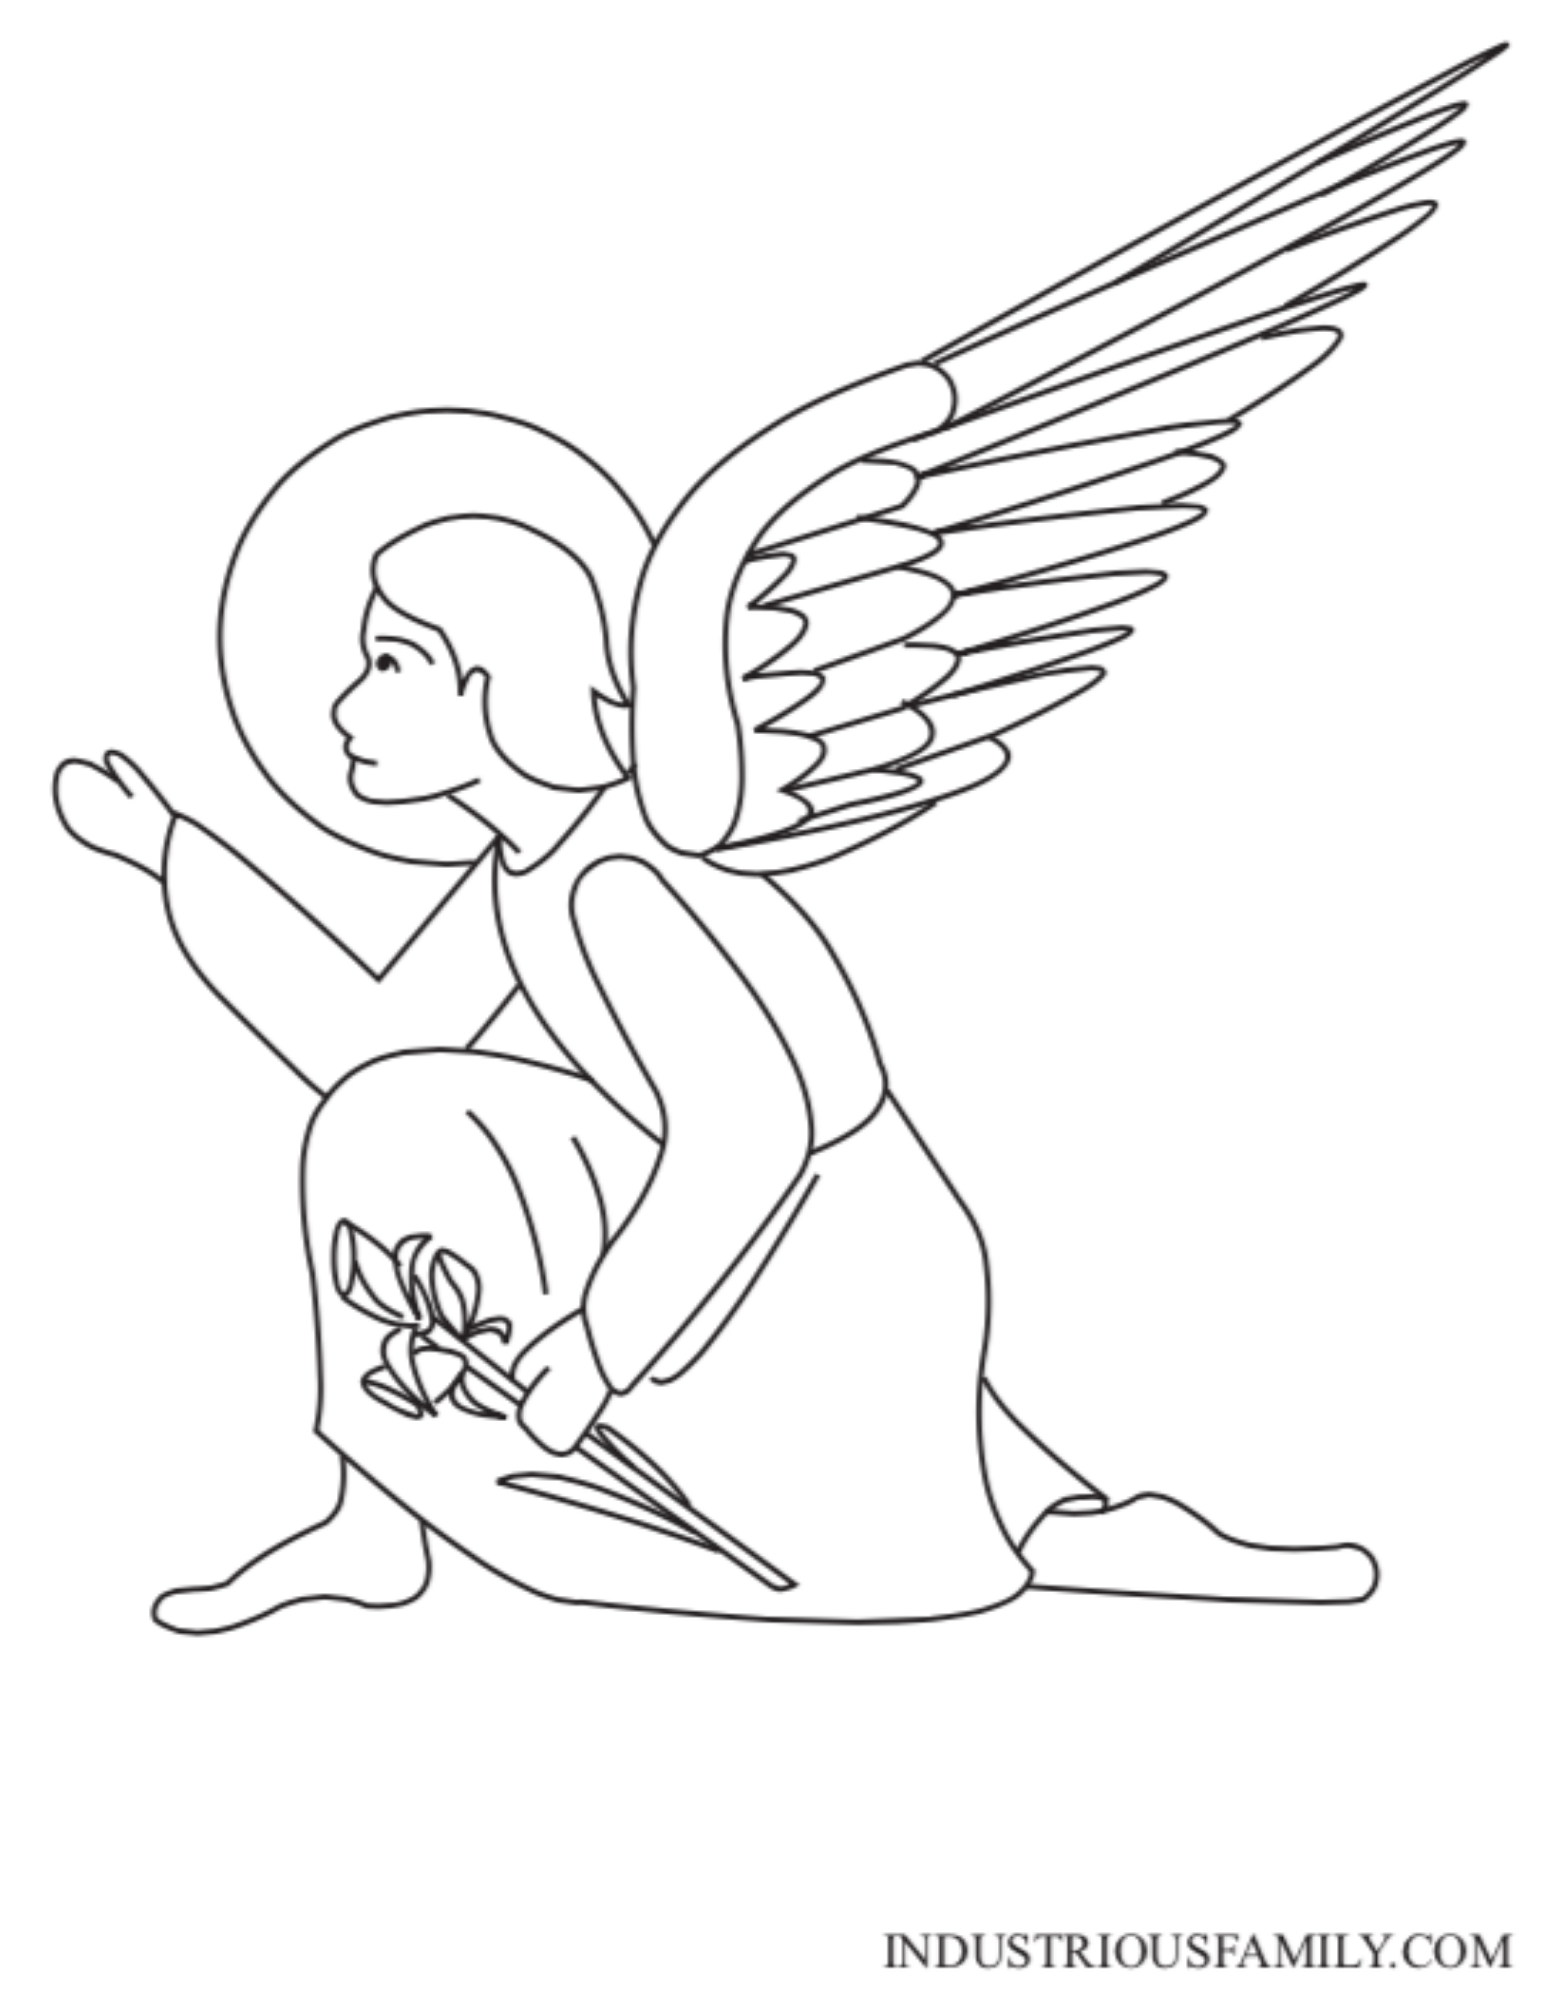 Download or print our original St. Gabriel the Archangel coloring page. St Gabriel and other saints are available free for your family’s coloring enjoyment.